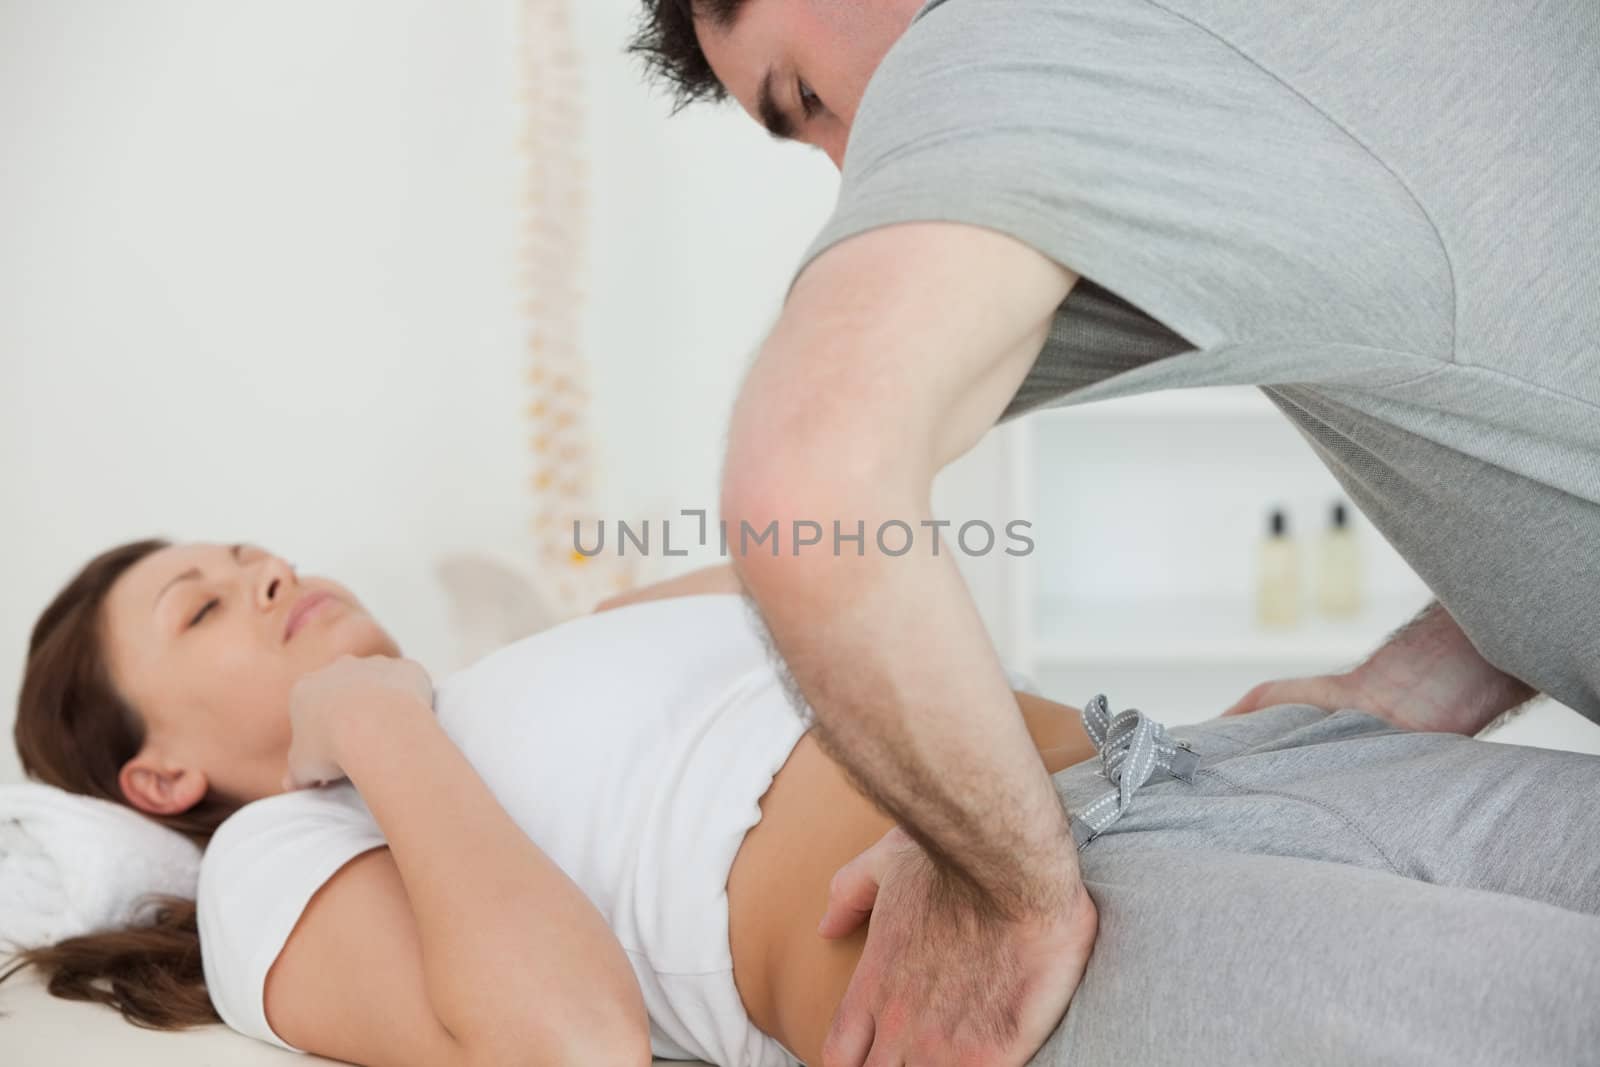 Woman lying while being examined by Wavebreakmedia